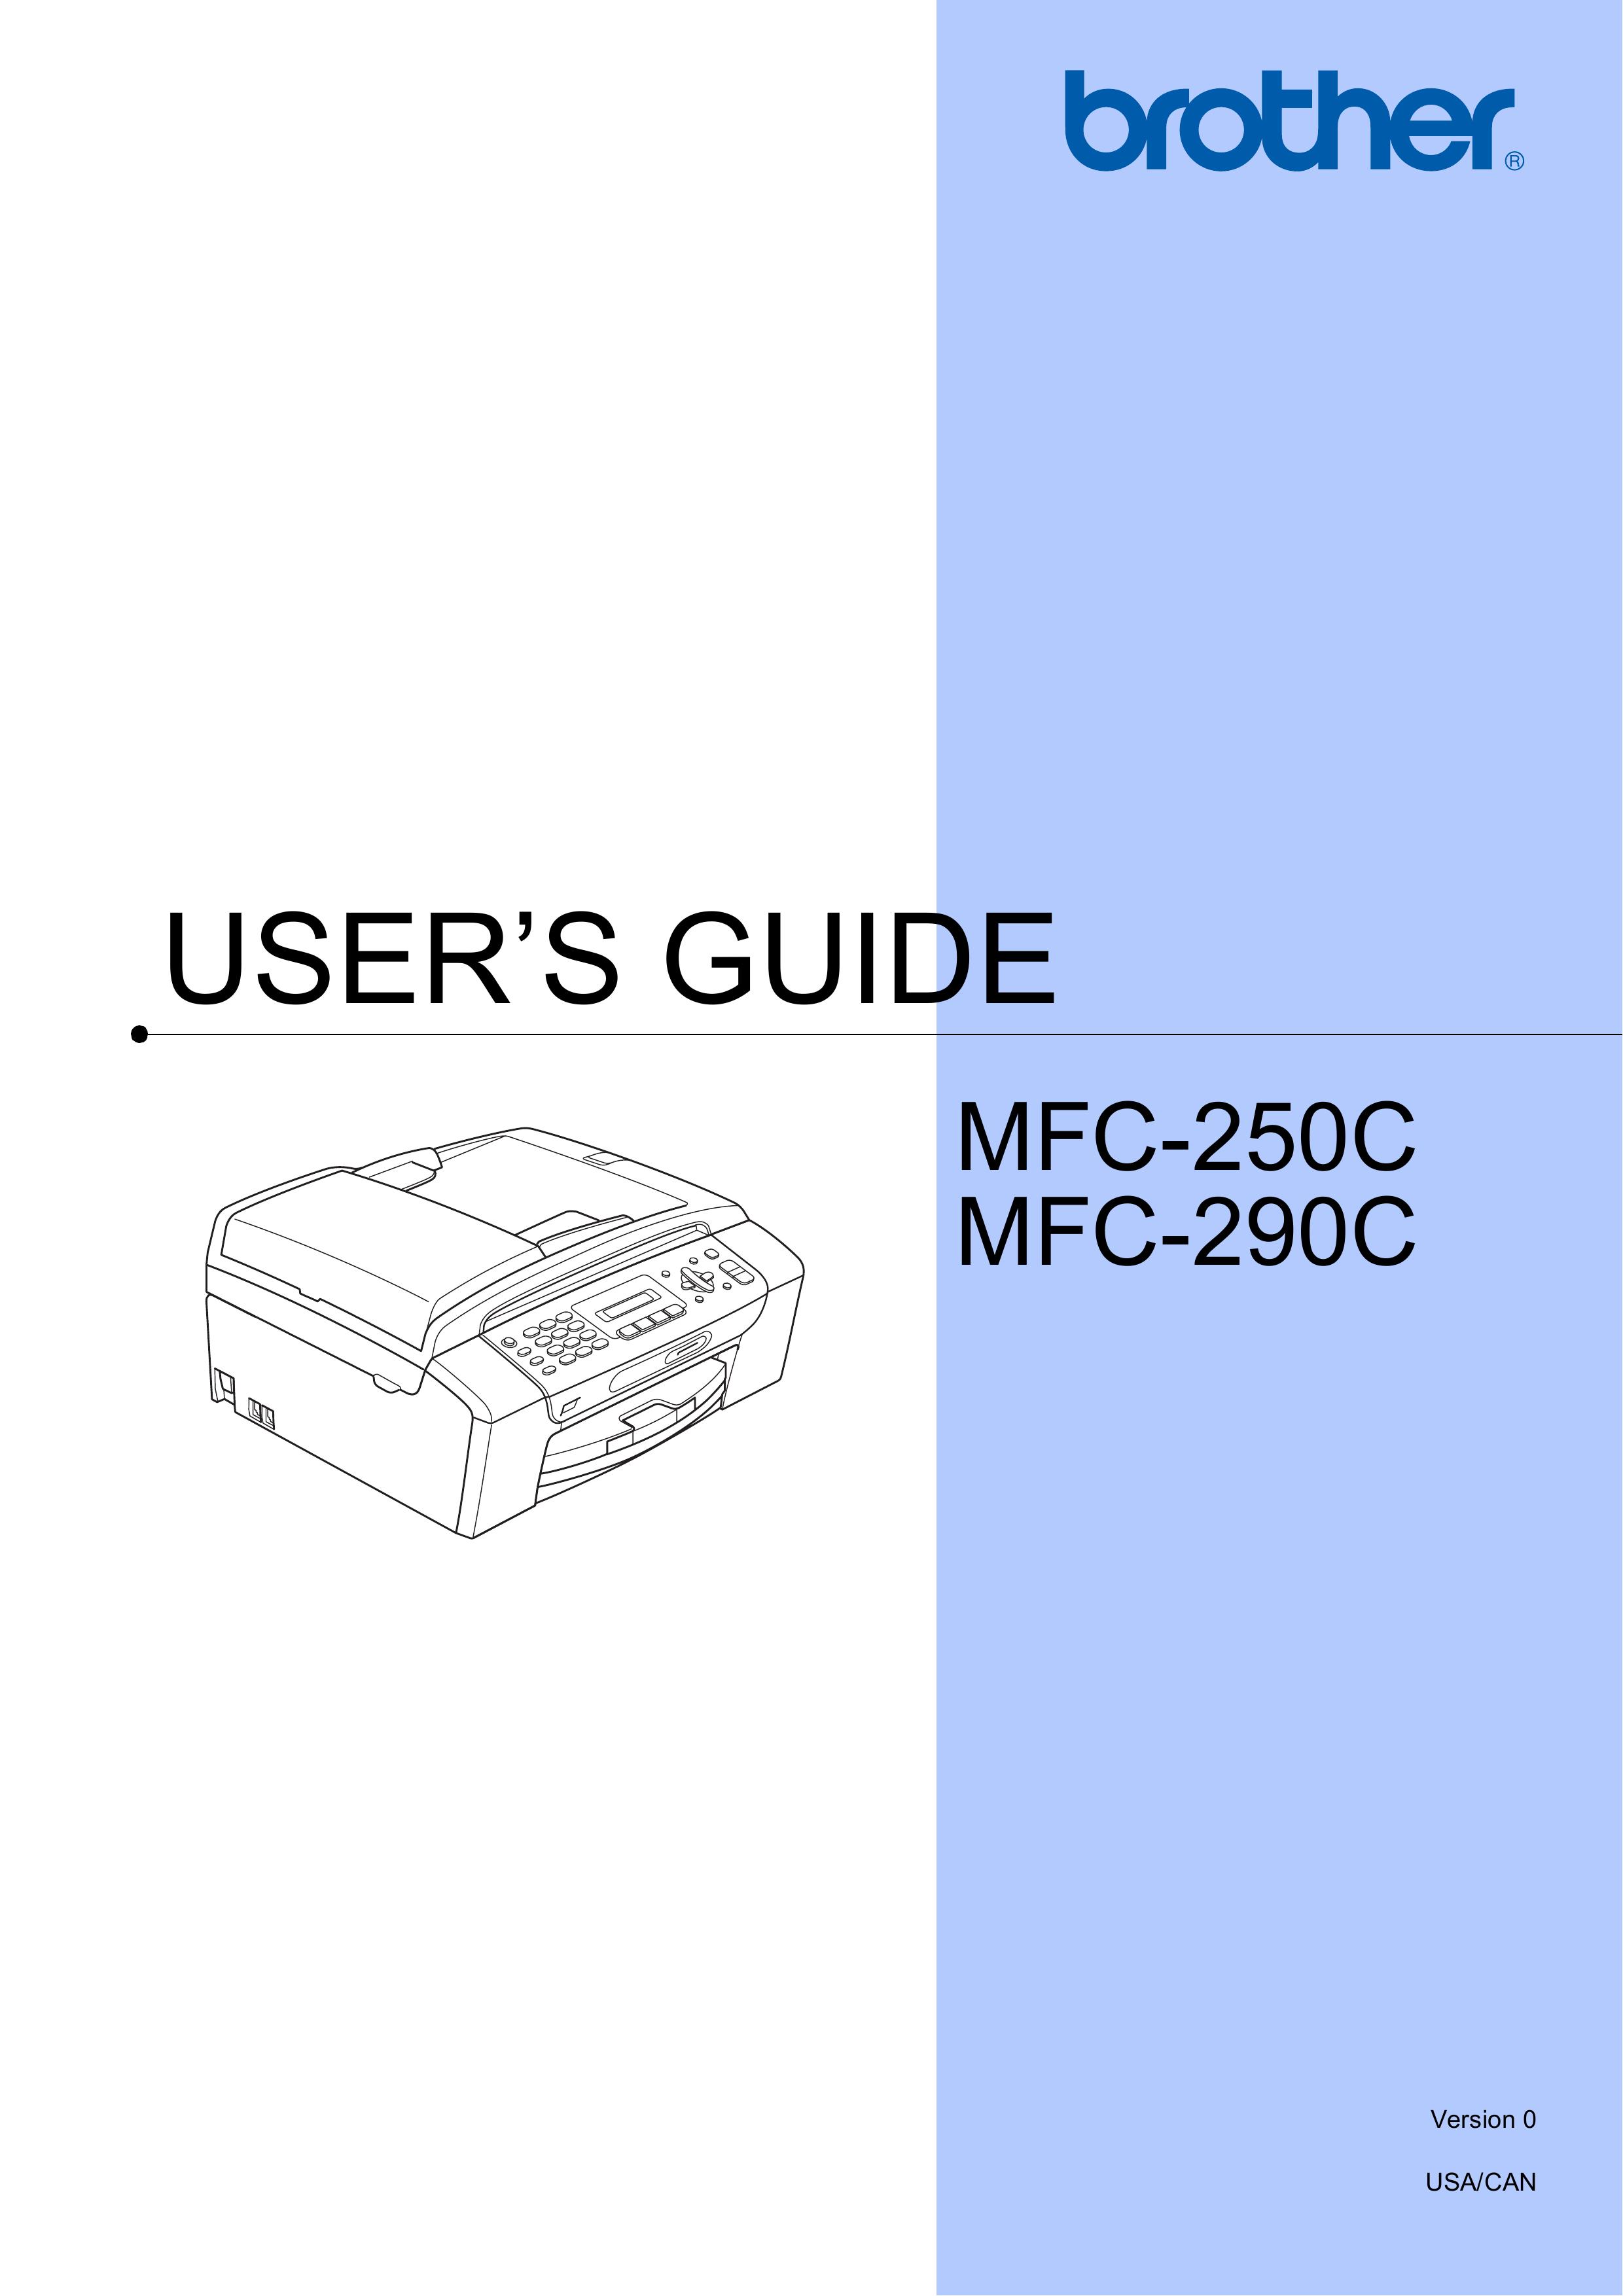 Brother MFC-290C Toaster User Manual